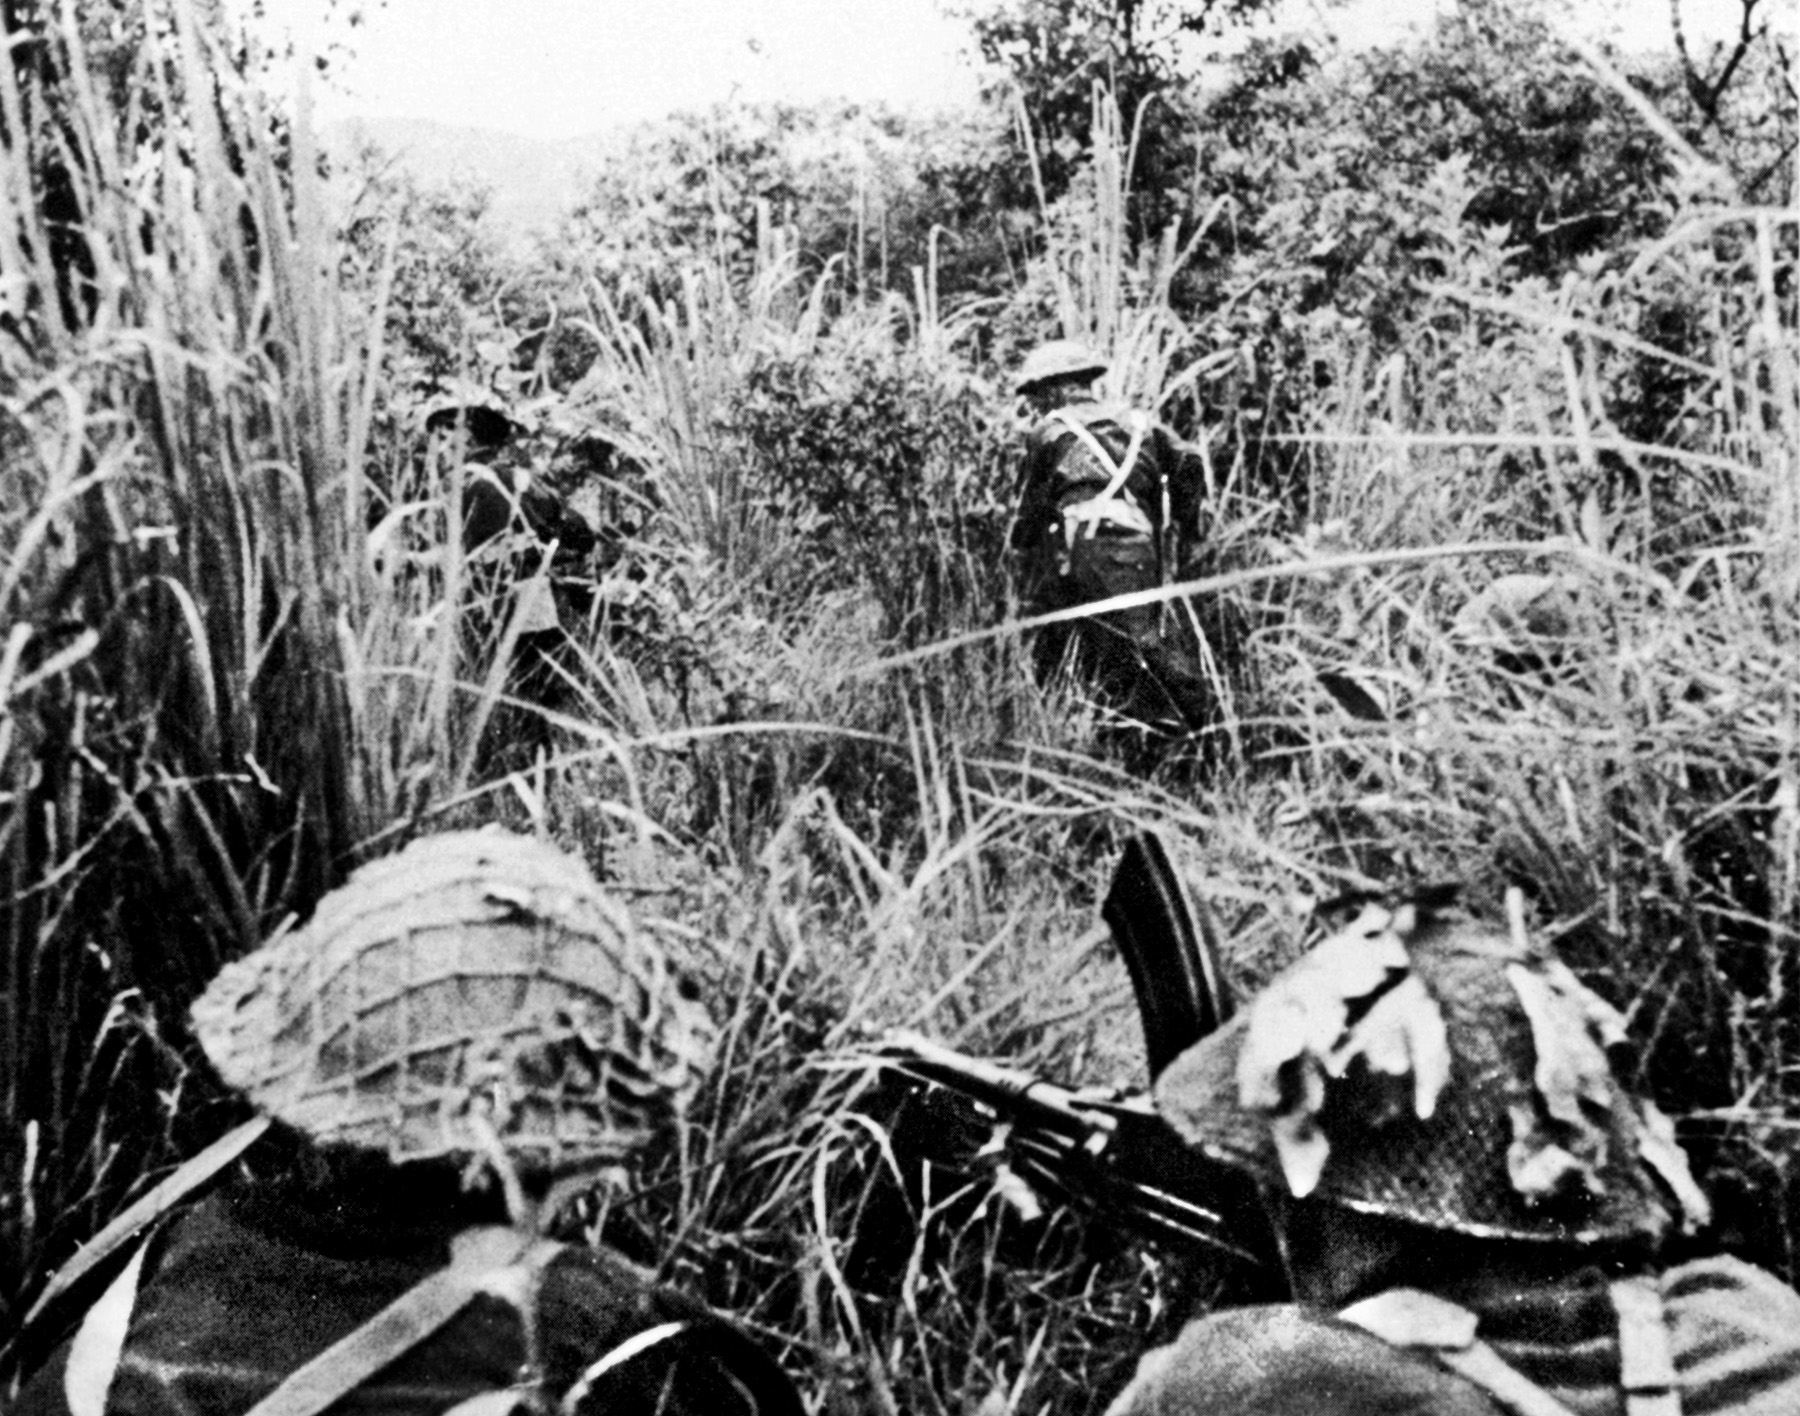 A British Bren gun covers the advance of a patrol through tall grass and thick undergrowth during the actions at Kohima and Imphal the spring of 1944. By then, the tide had turned in favor of the Allies in the CBI.